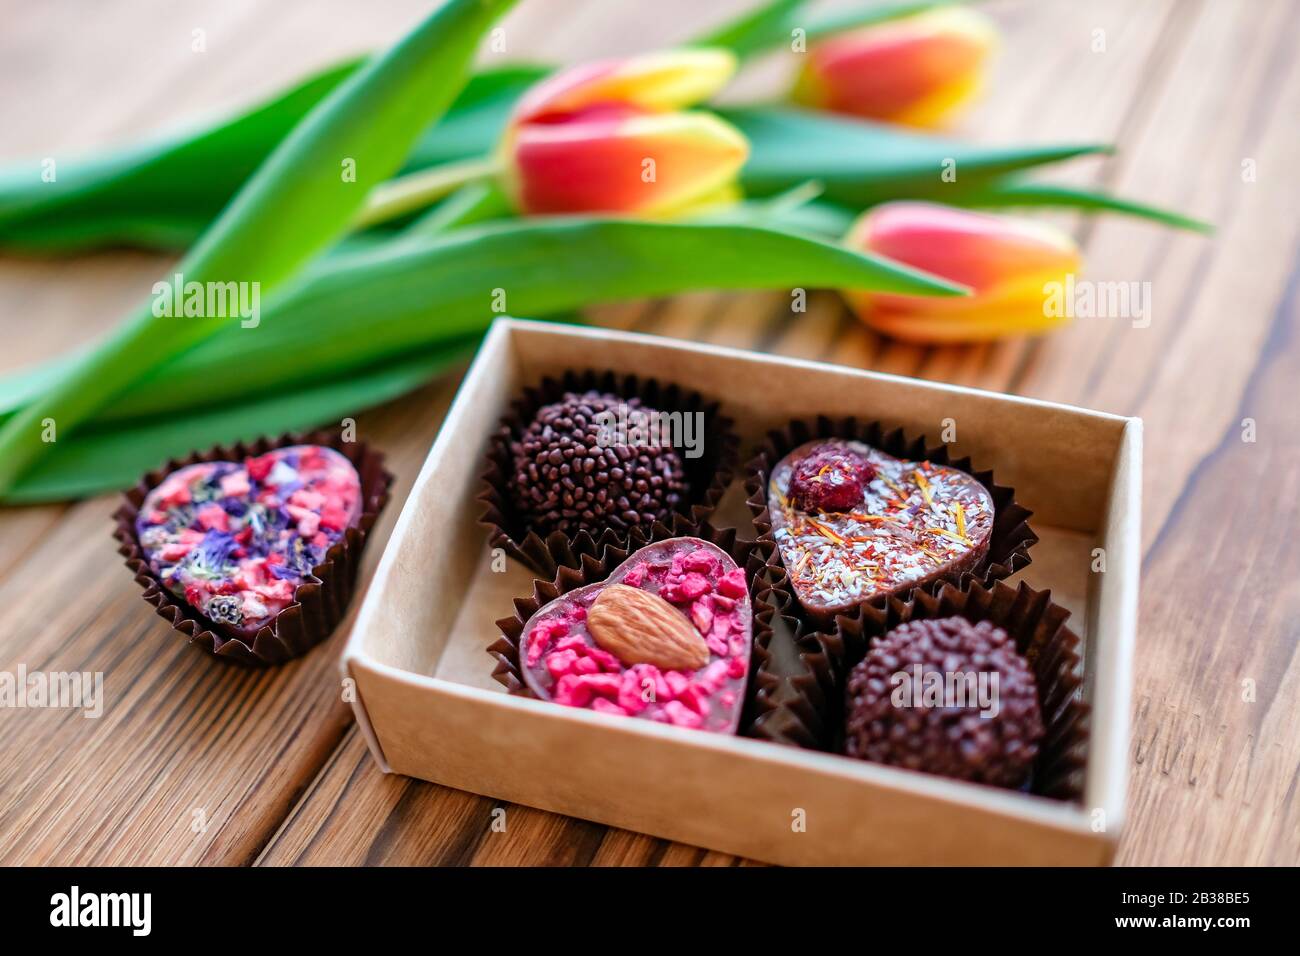 Handmade sweets in a box next to tulips for the holiday, wooden background. On march 8 Stock Photo